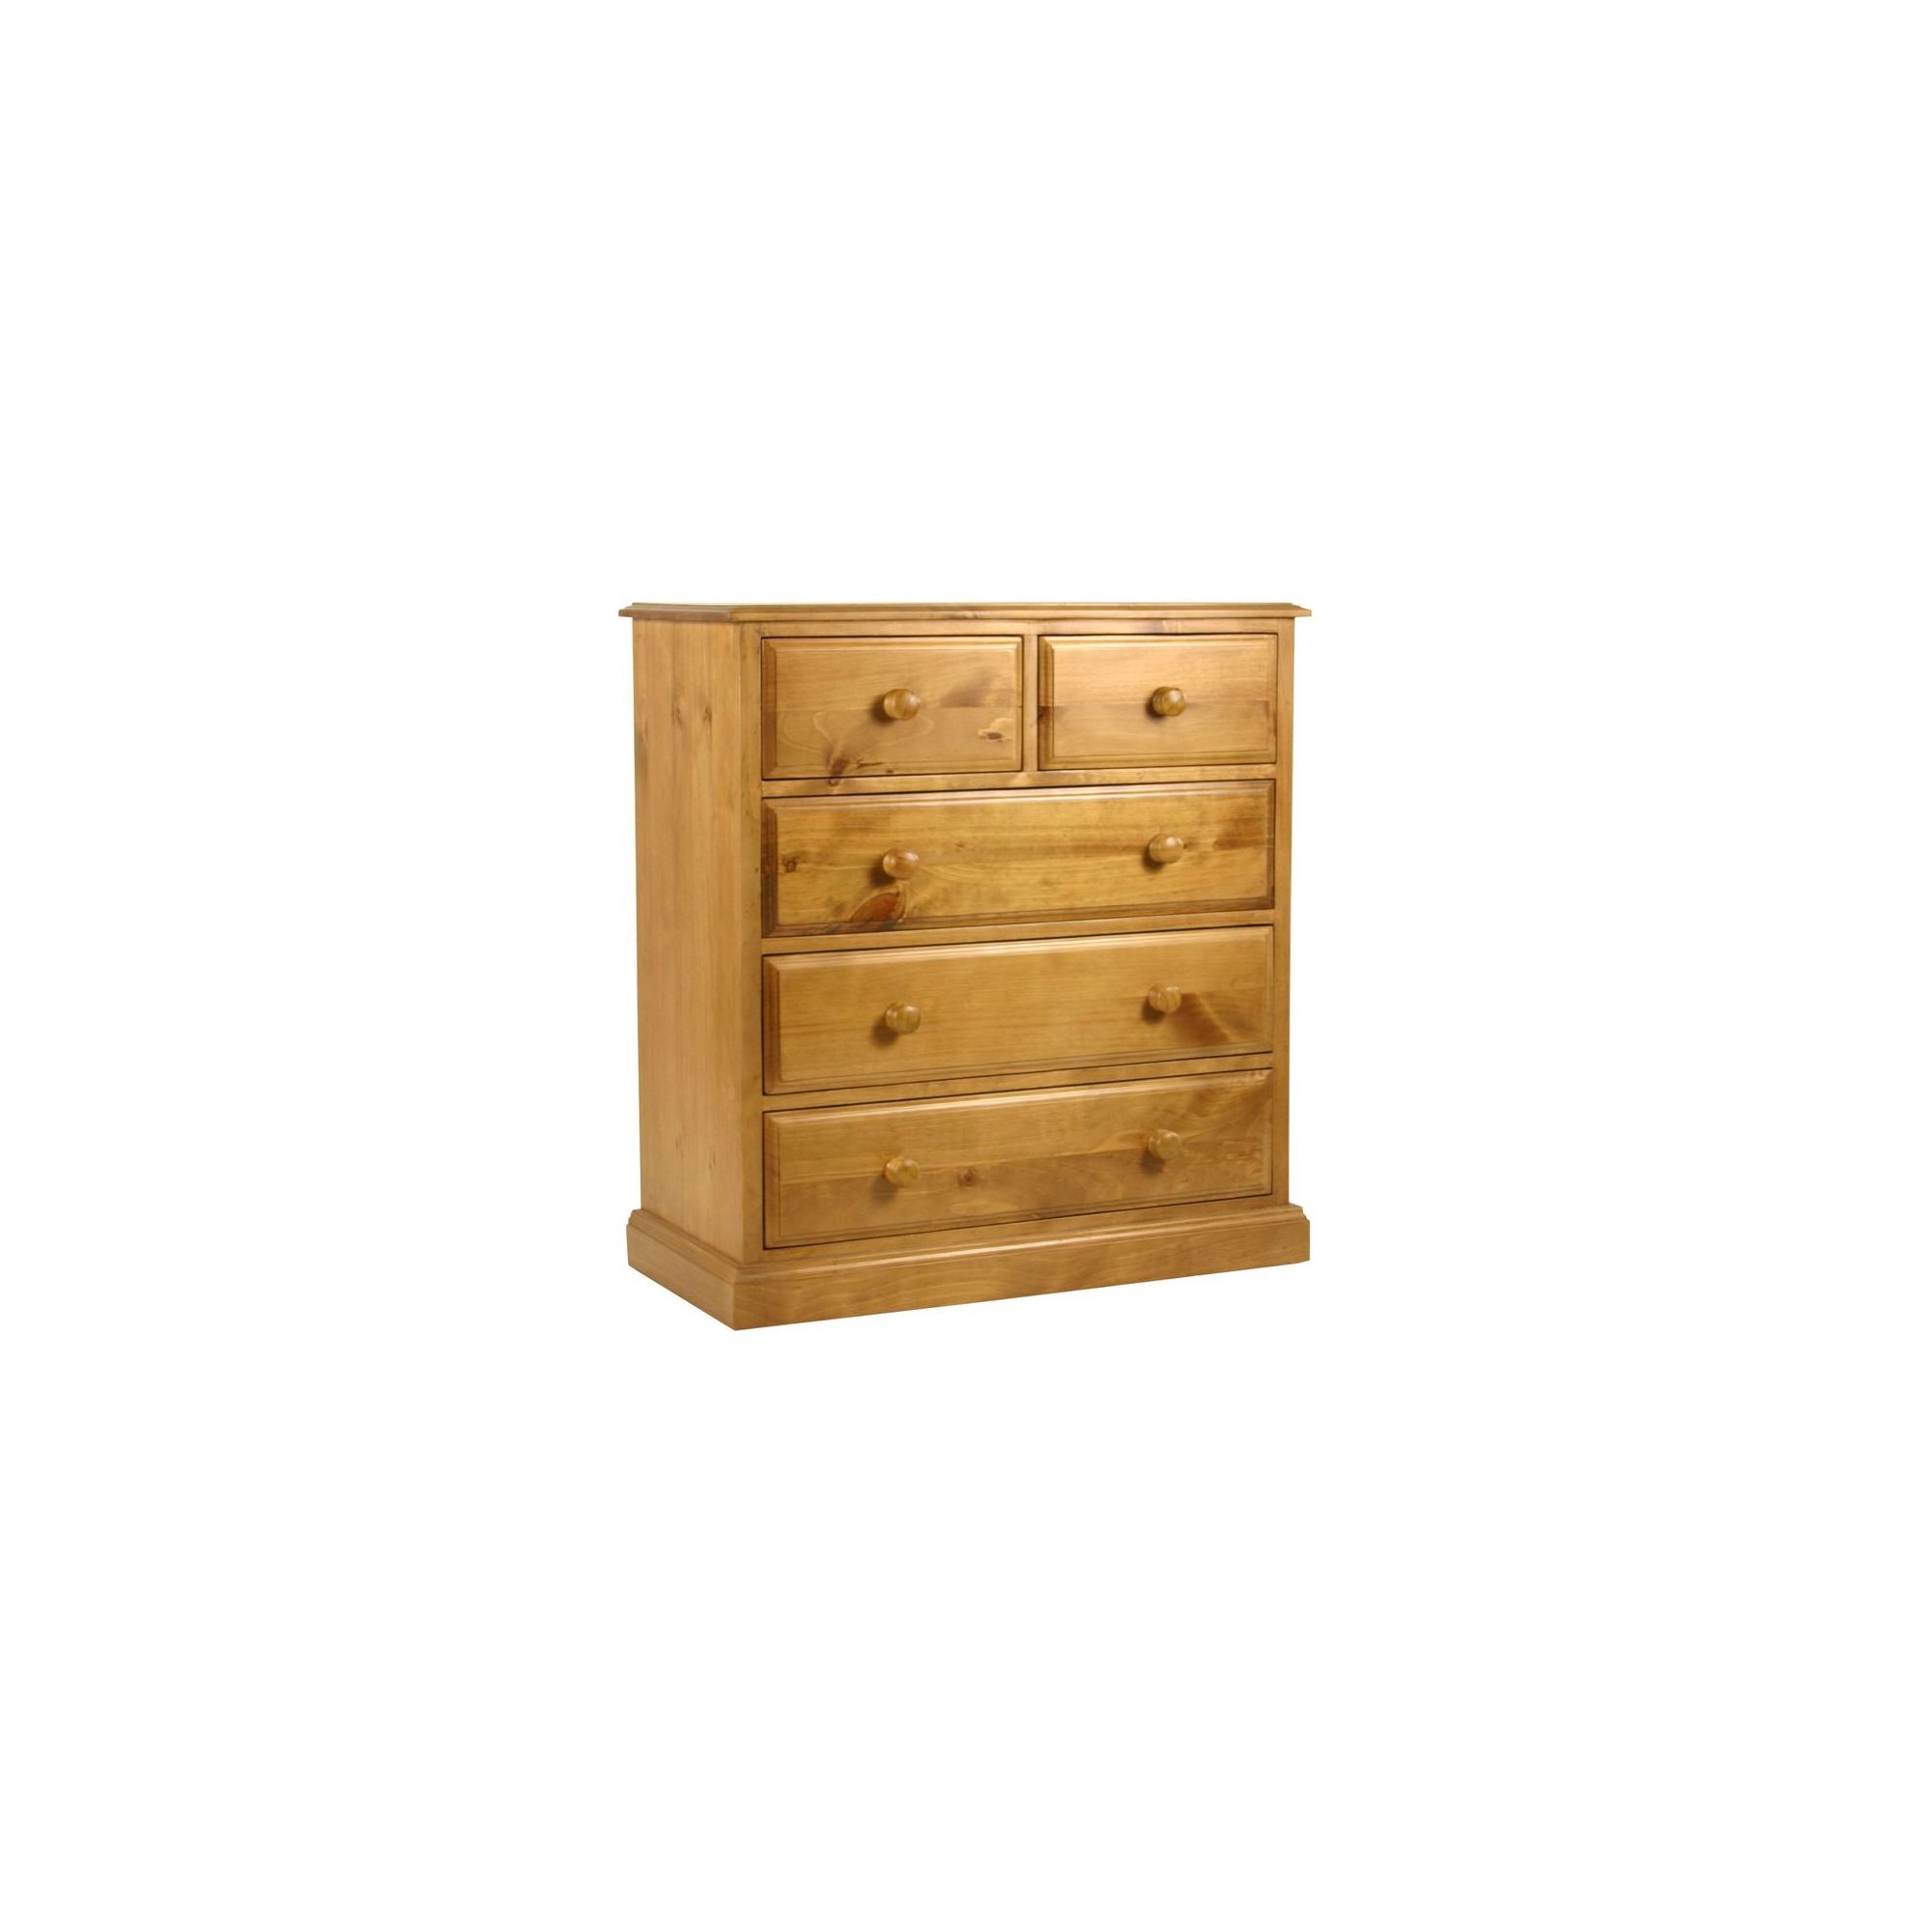 Kelburn Furniture Pine 2 Over 3 Drawer Large Chest in Antique Wax Lacquer at Tesco Direct